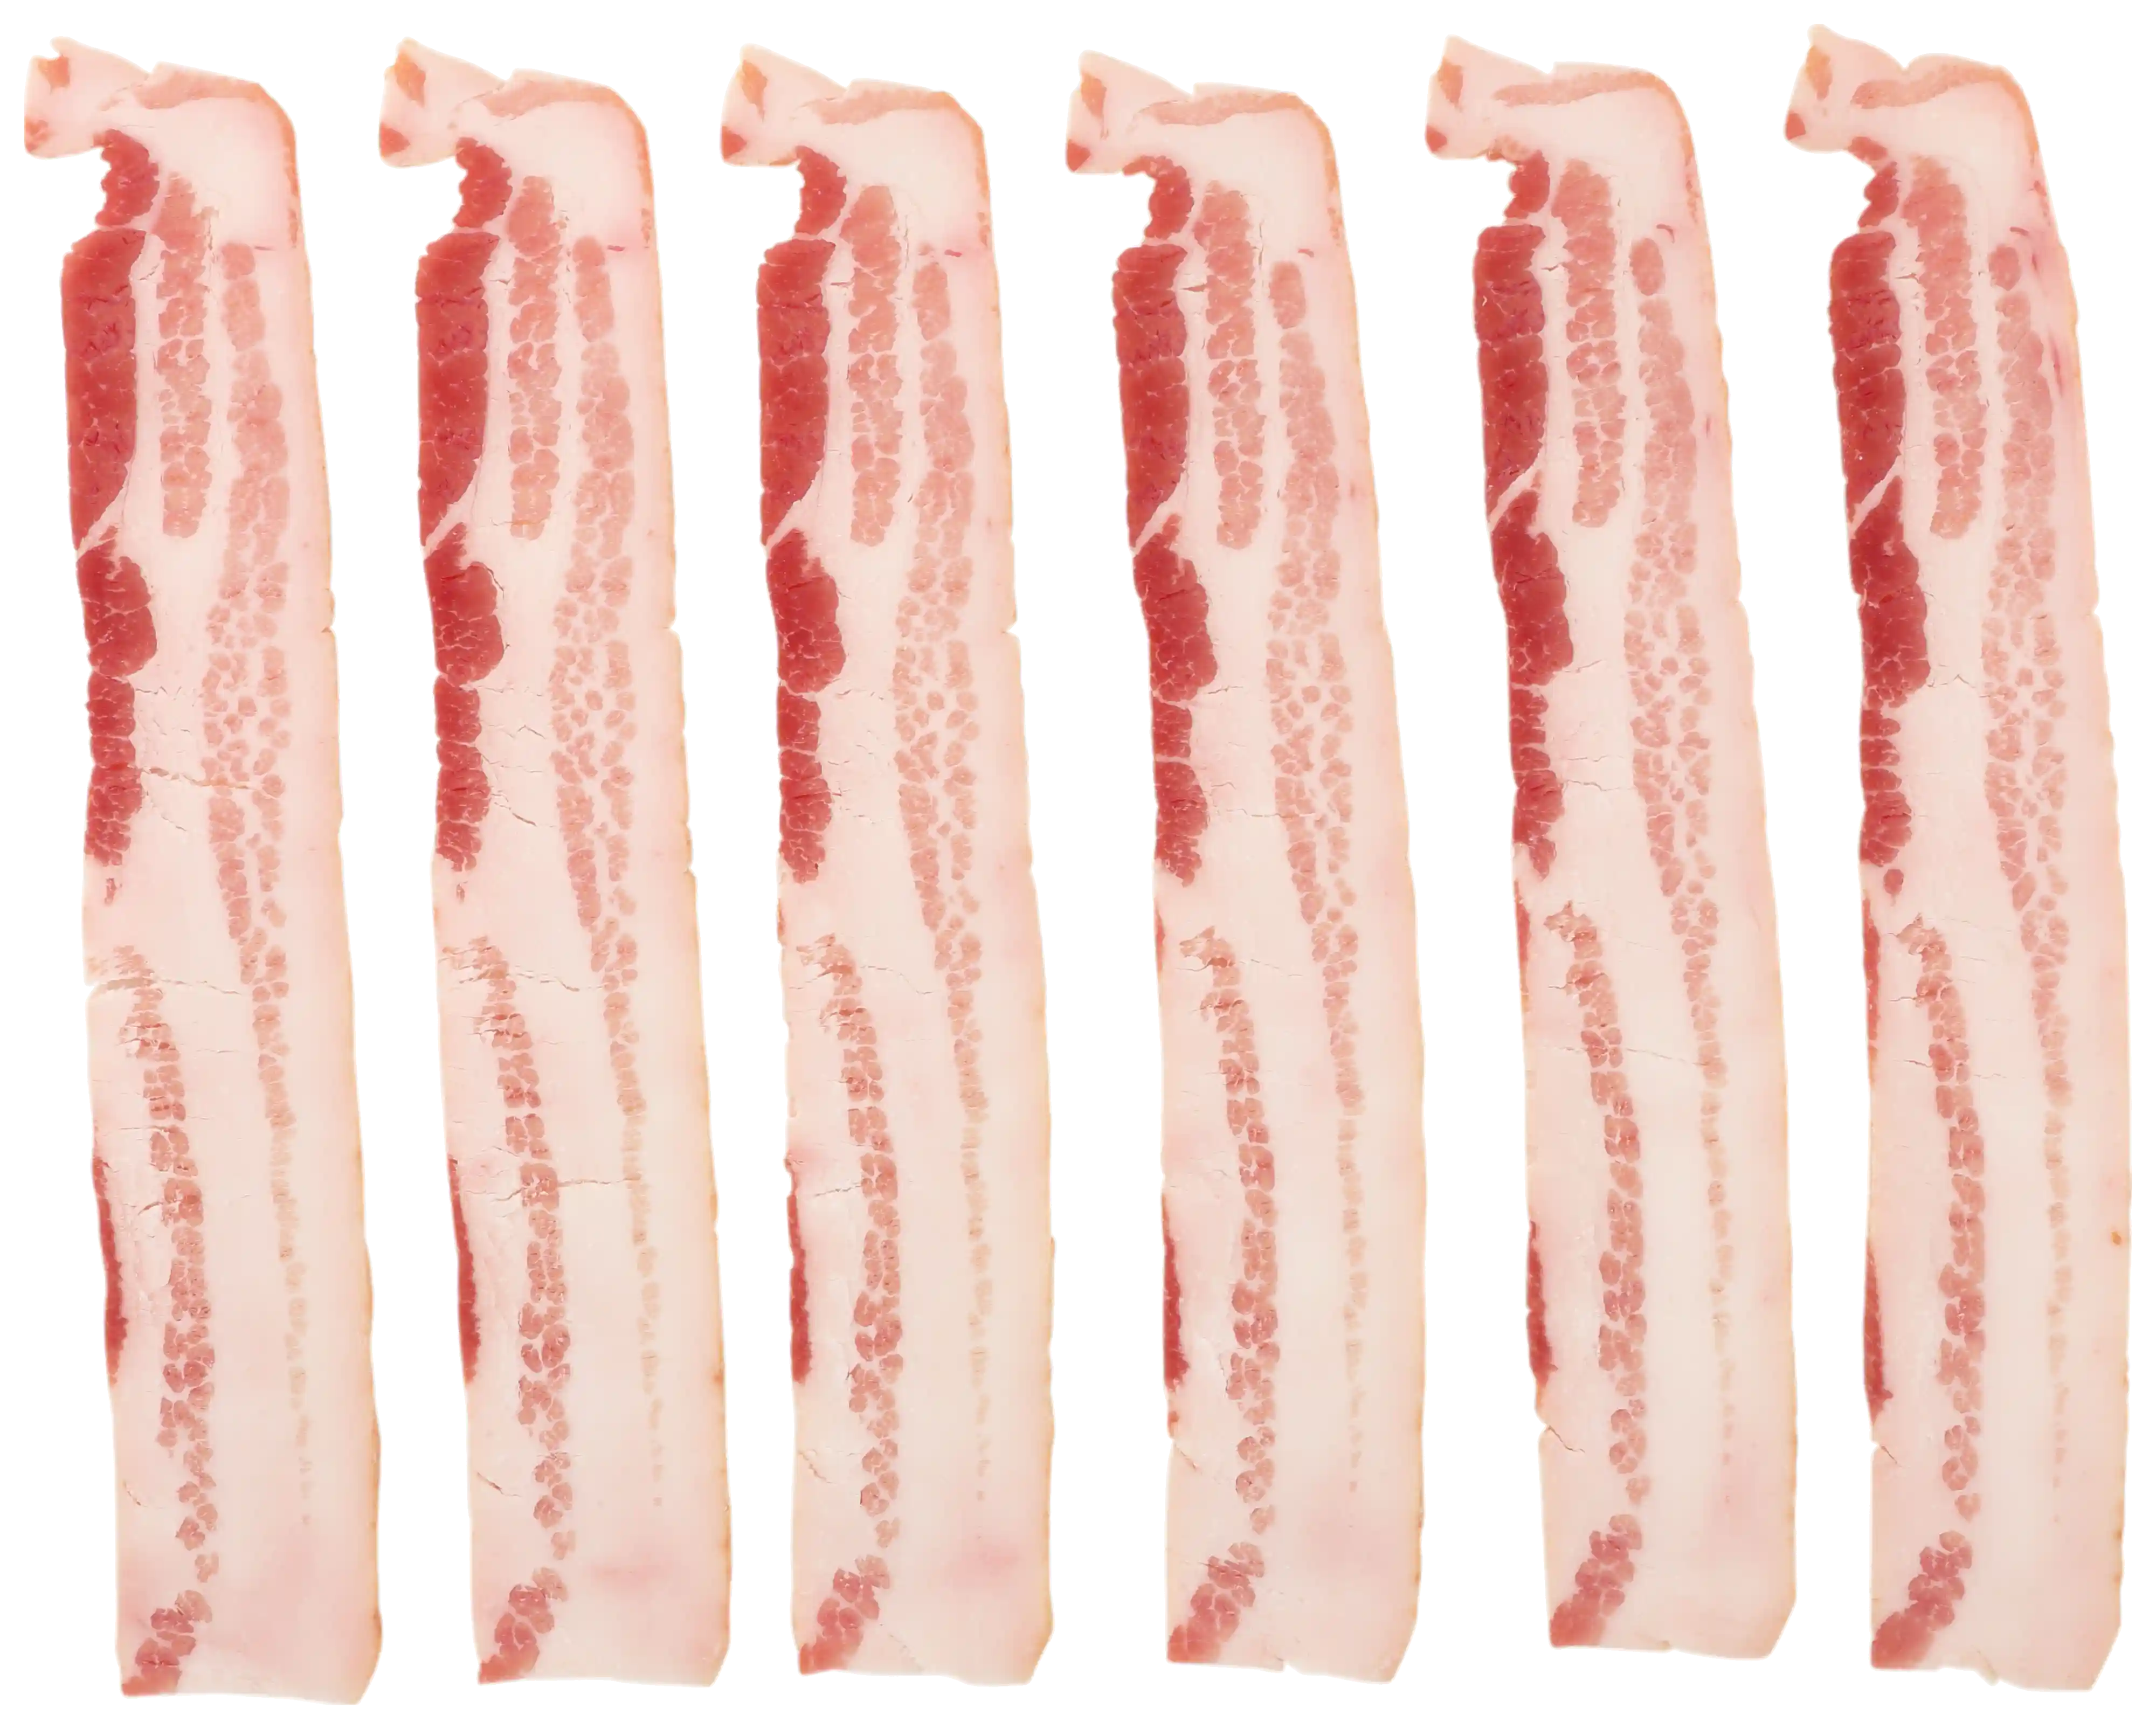 Wright® Brand Naturally Applewood Smoked Thick Sliced Bacon, Bulk, 15 Lbs, 10-14 Slices per Pound, Gas Flushed_image_21